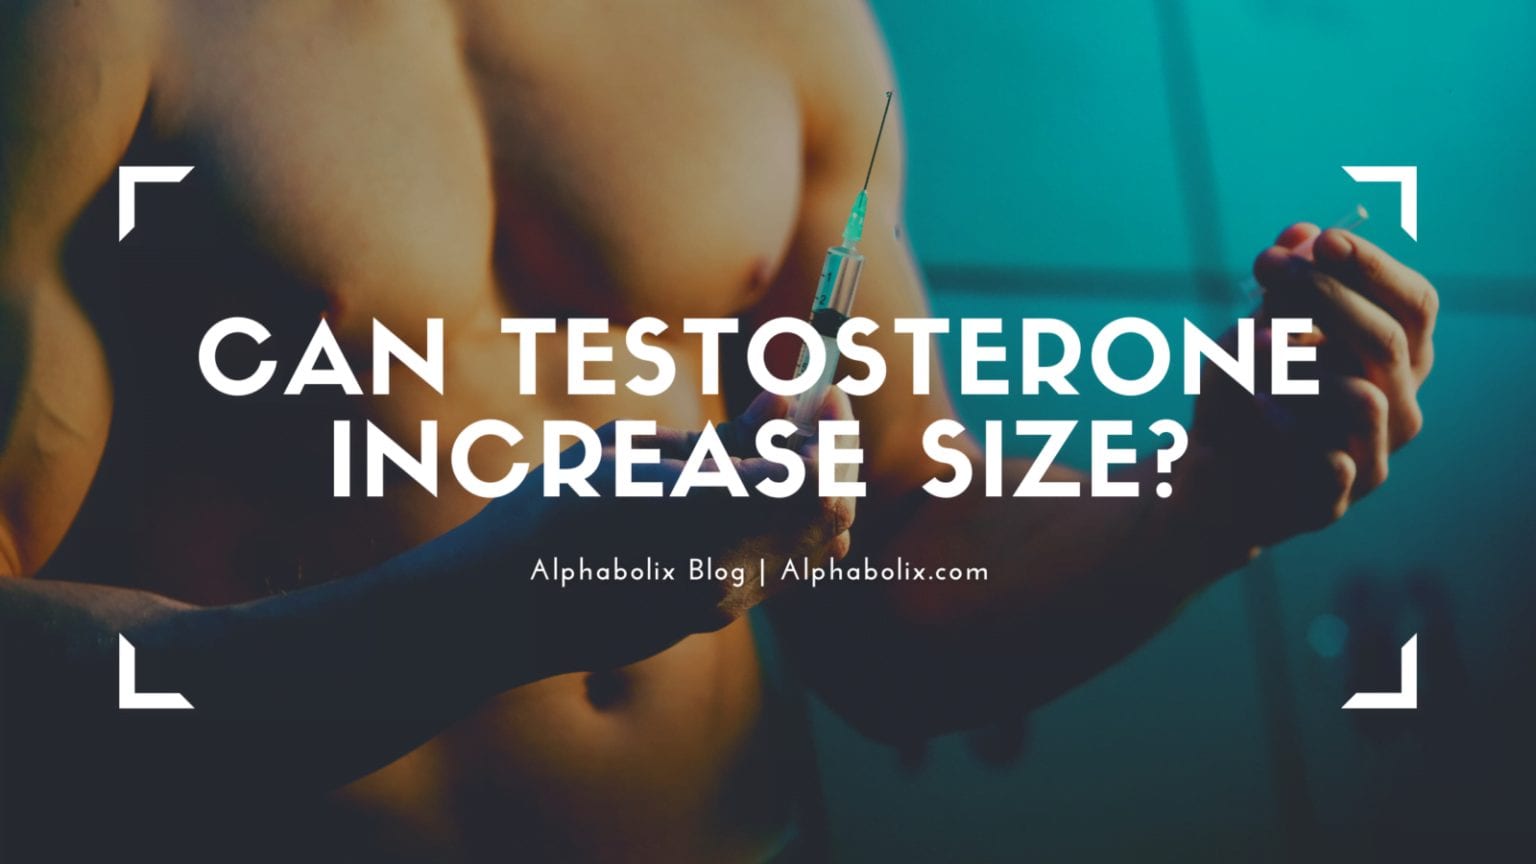 Can testosterone increase size